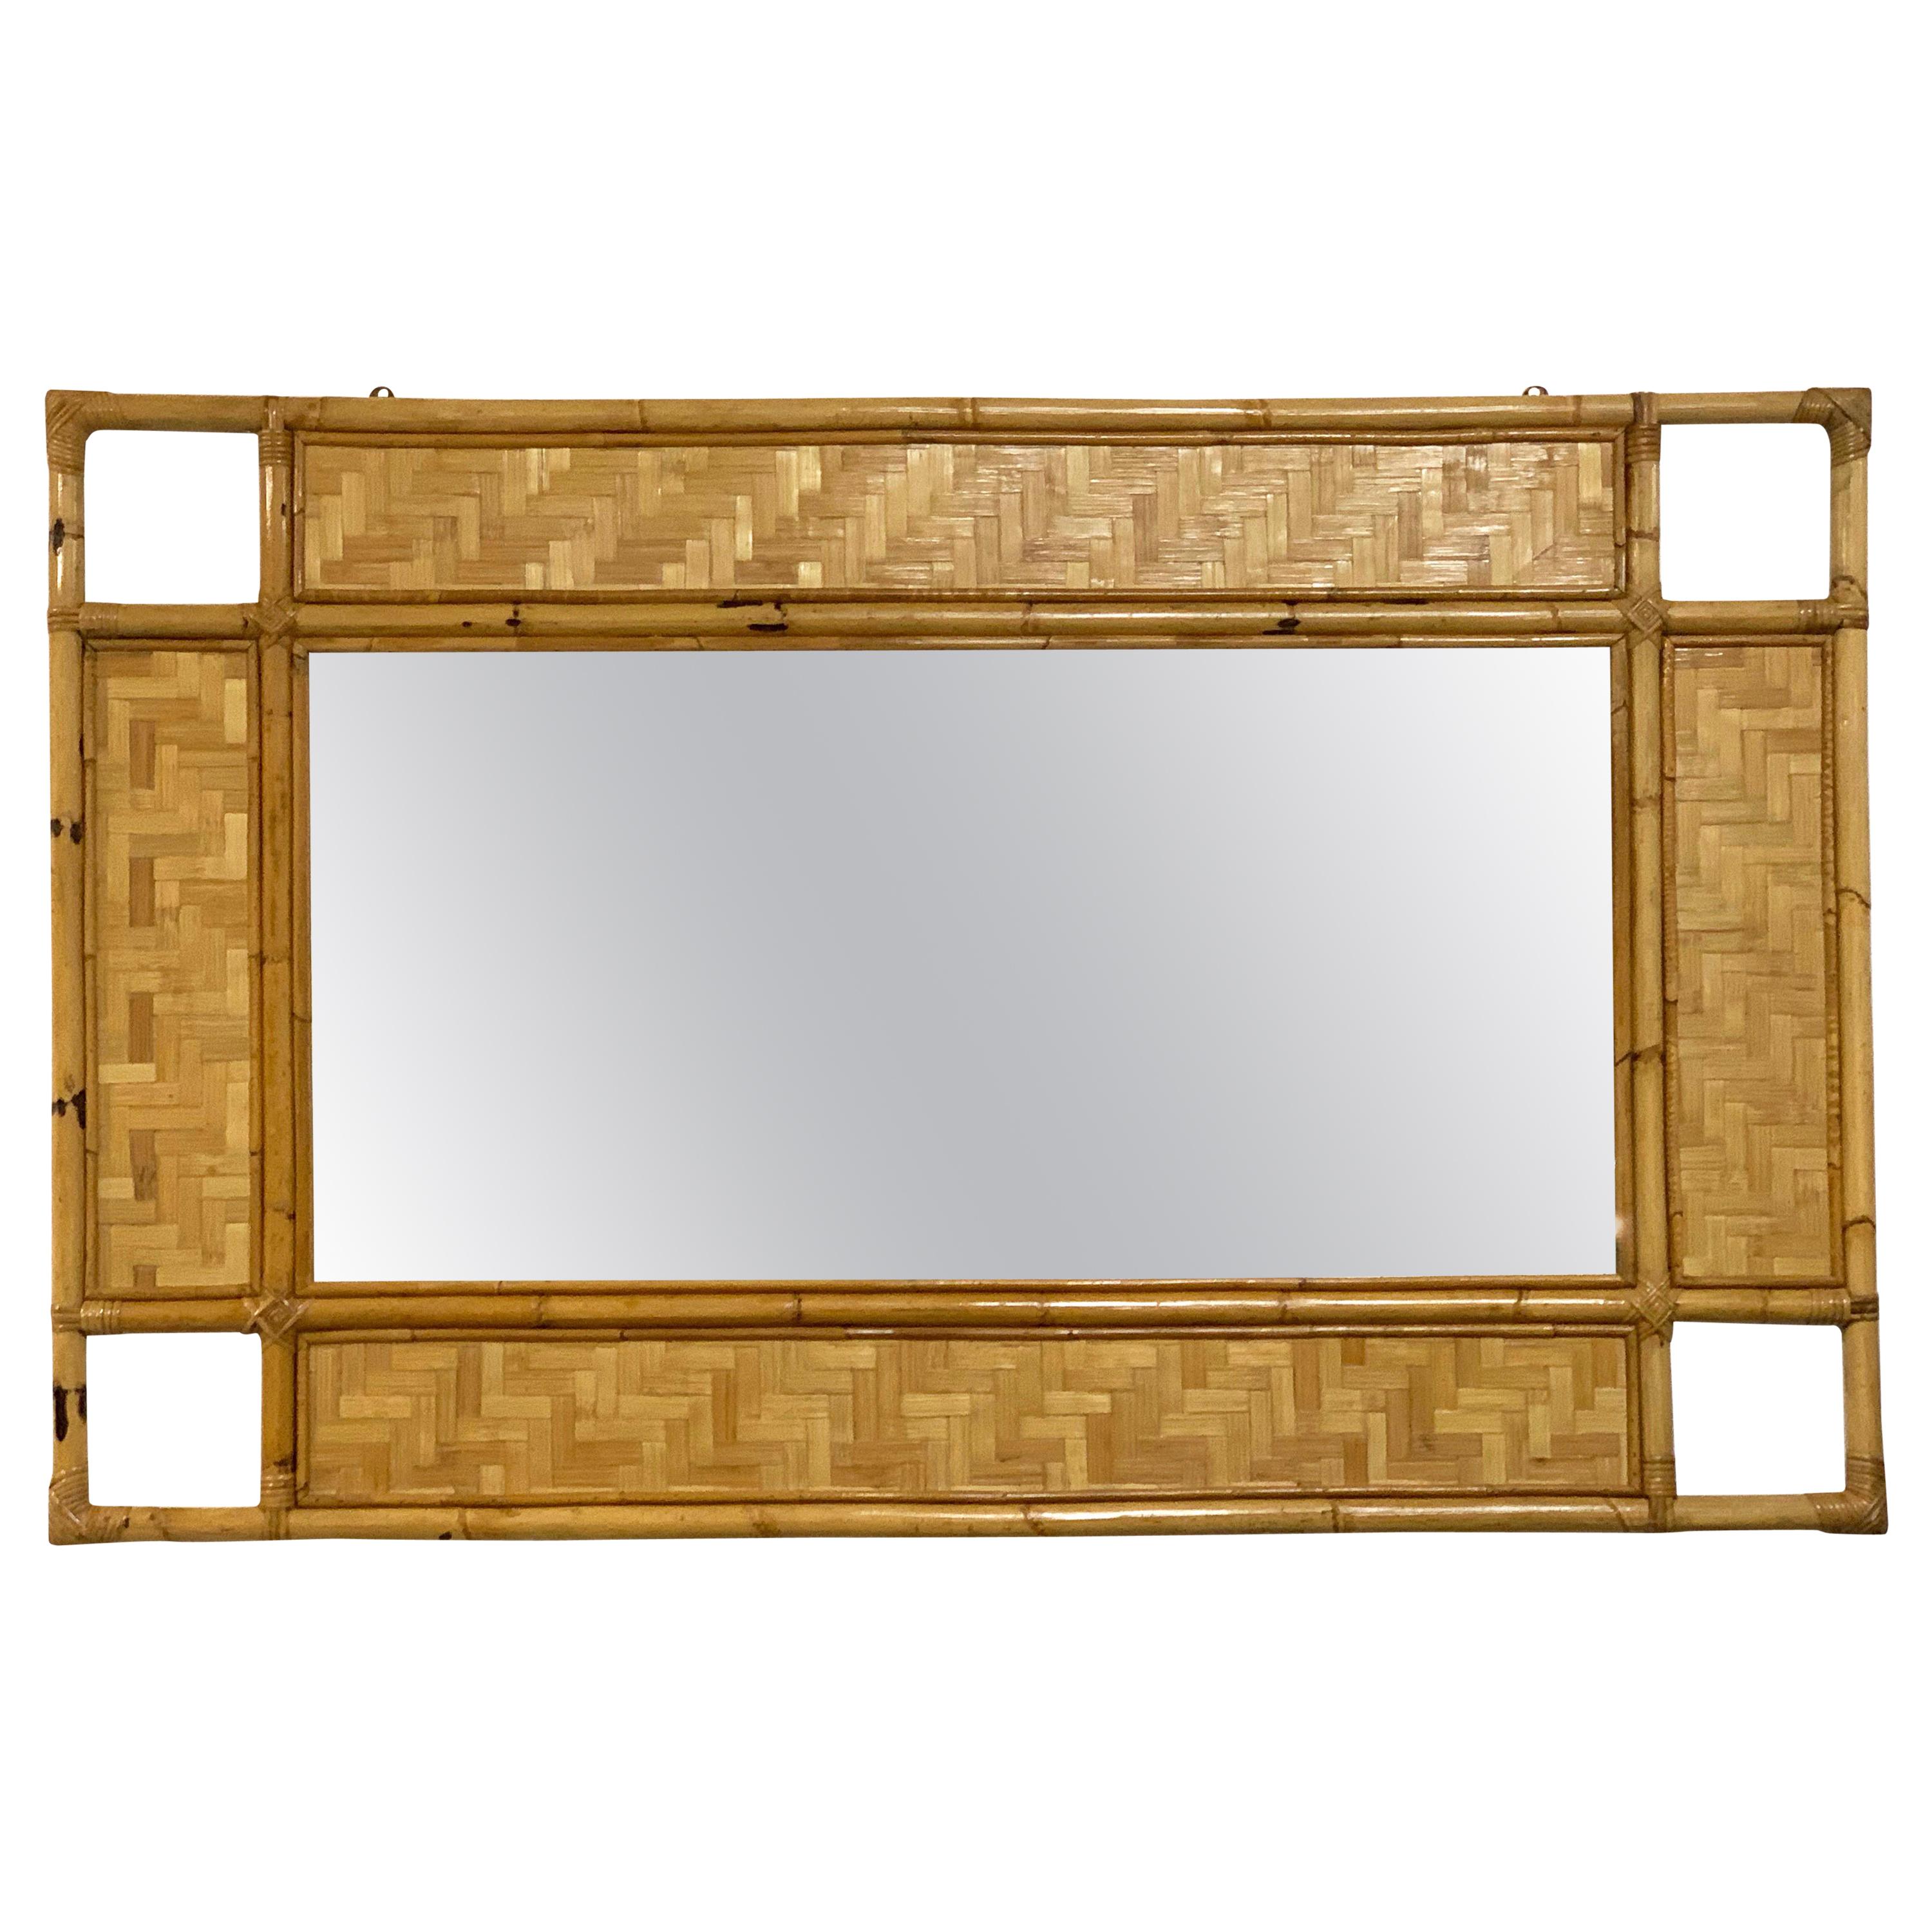 Italian Rectangular Mirror with Bamboo, Rattan and Wicker Structure, 1970s